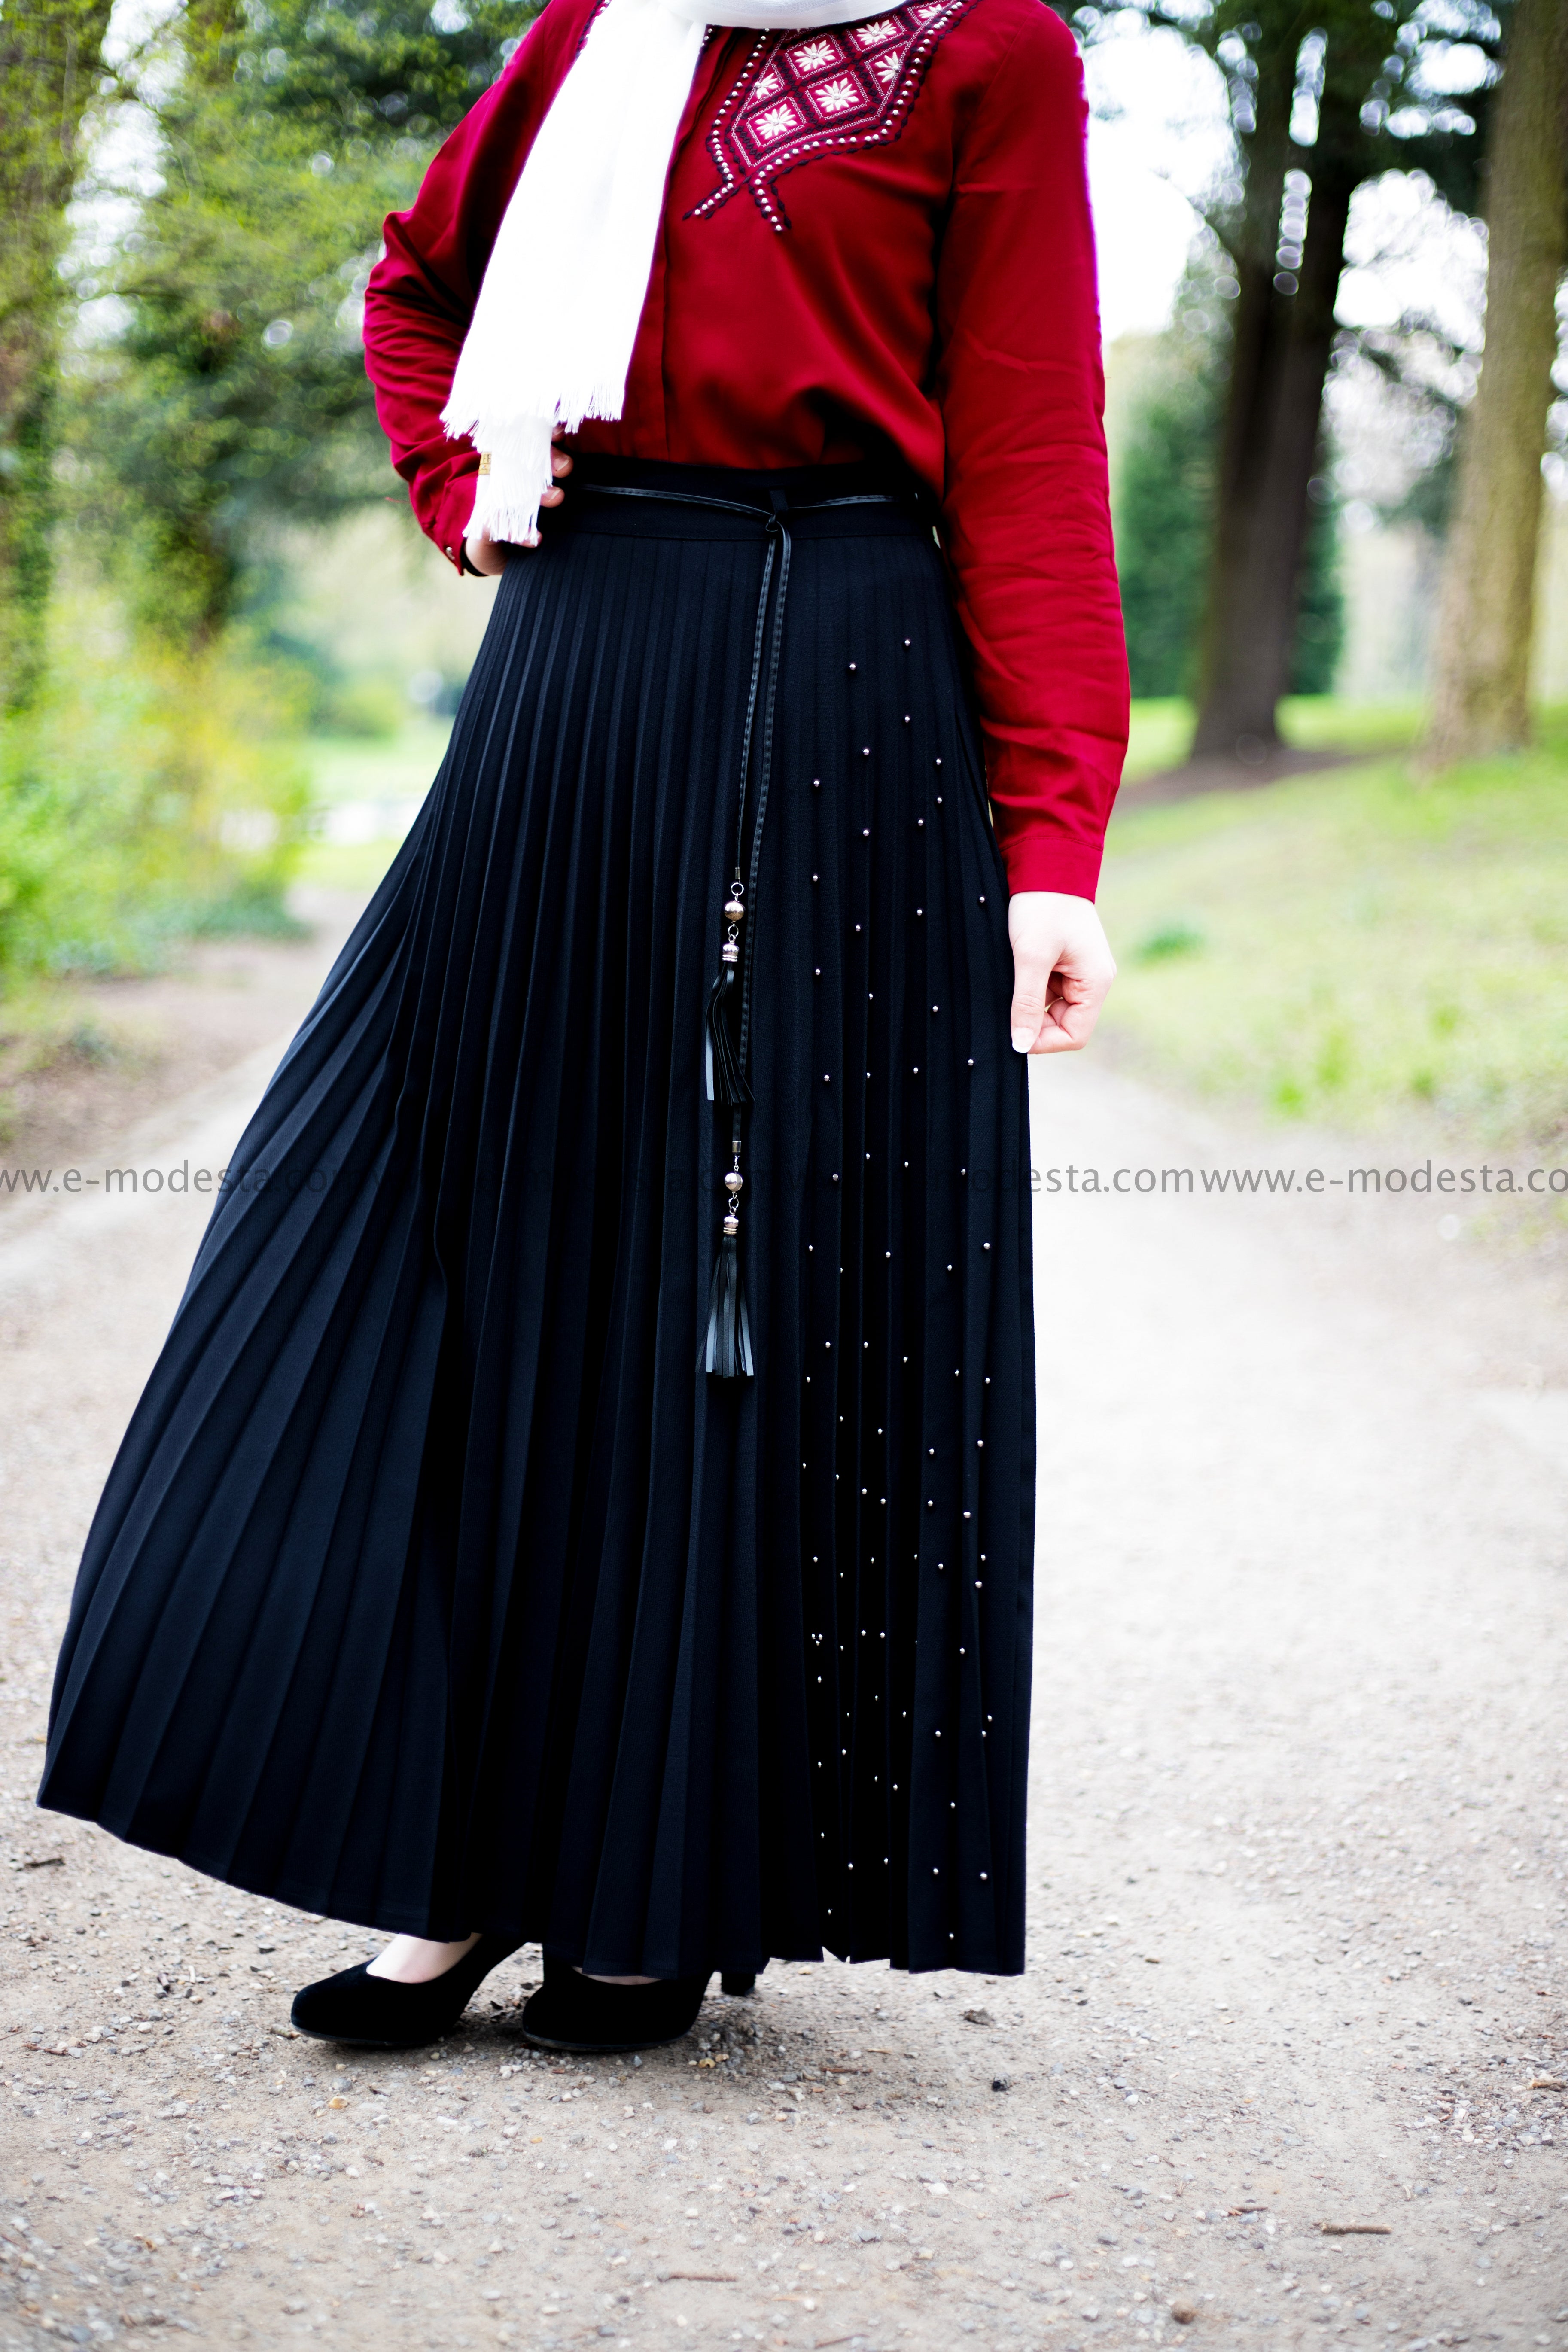 SALE Pleated Maxi Skirt | Black Color | Pearls on One Side - E-Modesta